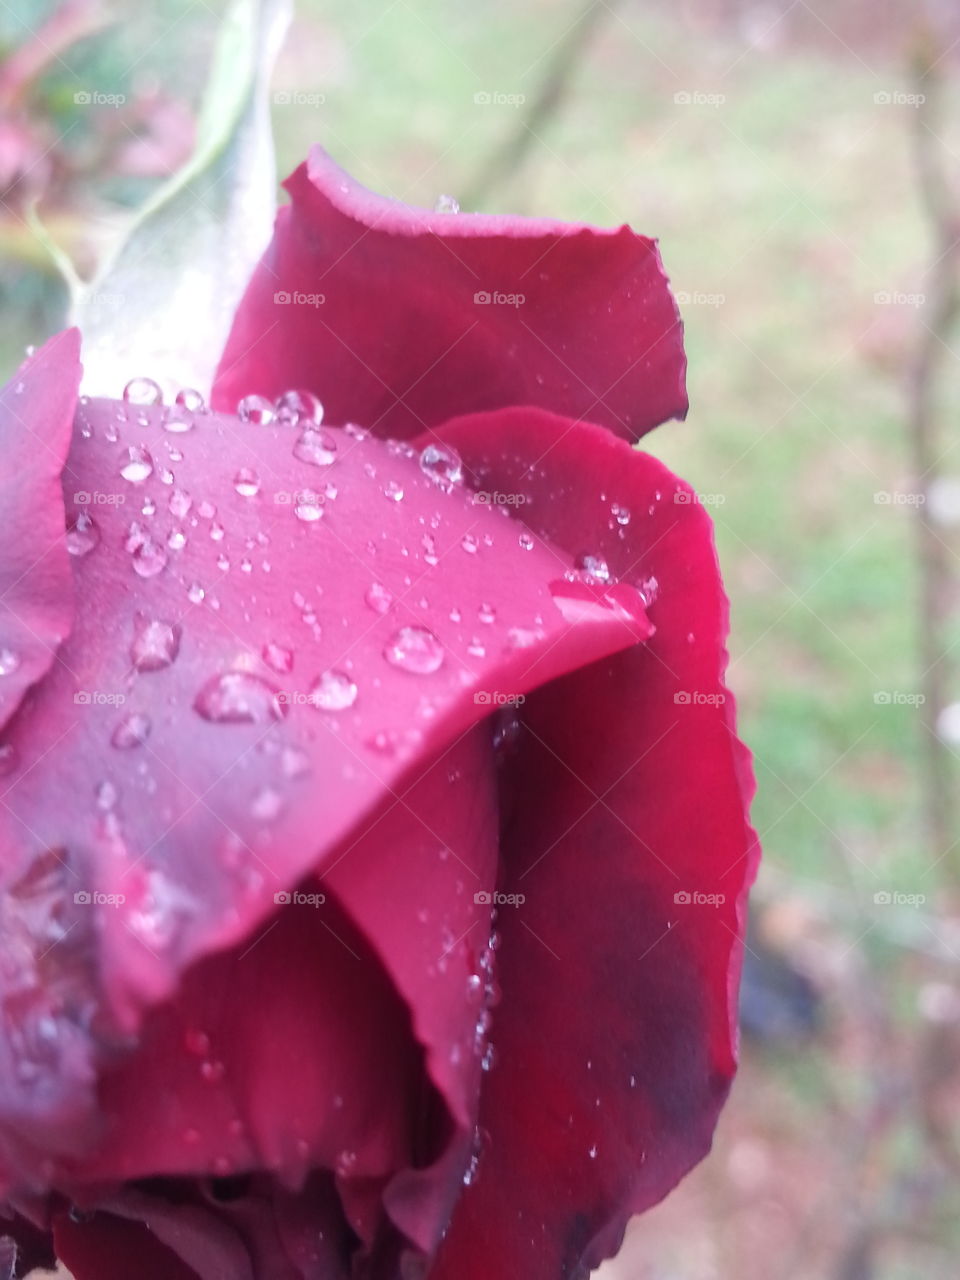 Romantic rose with rain, early spring signs 